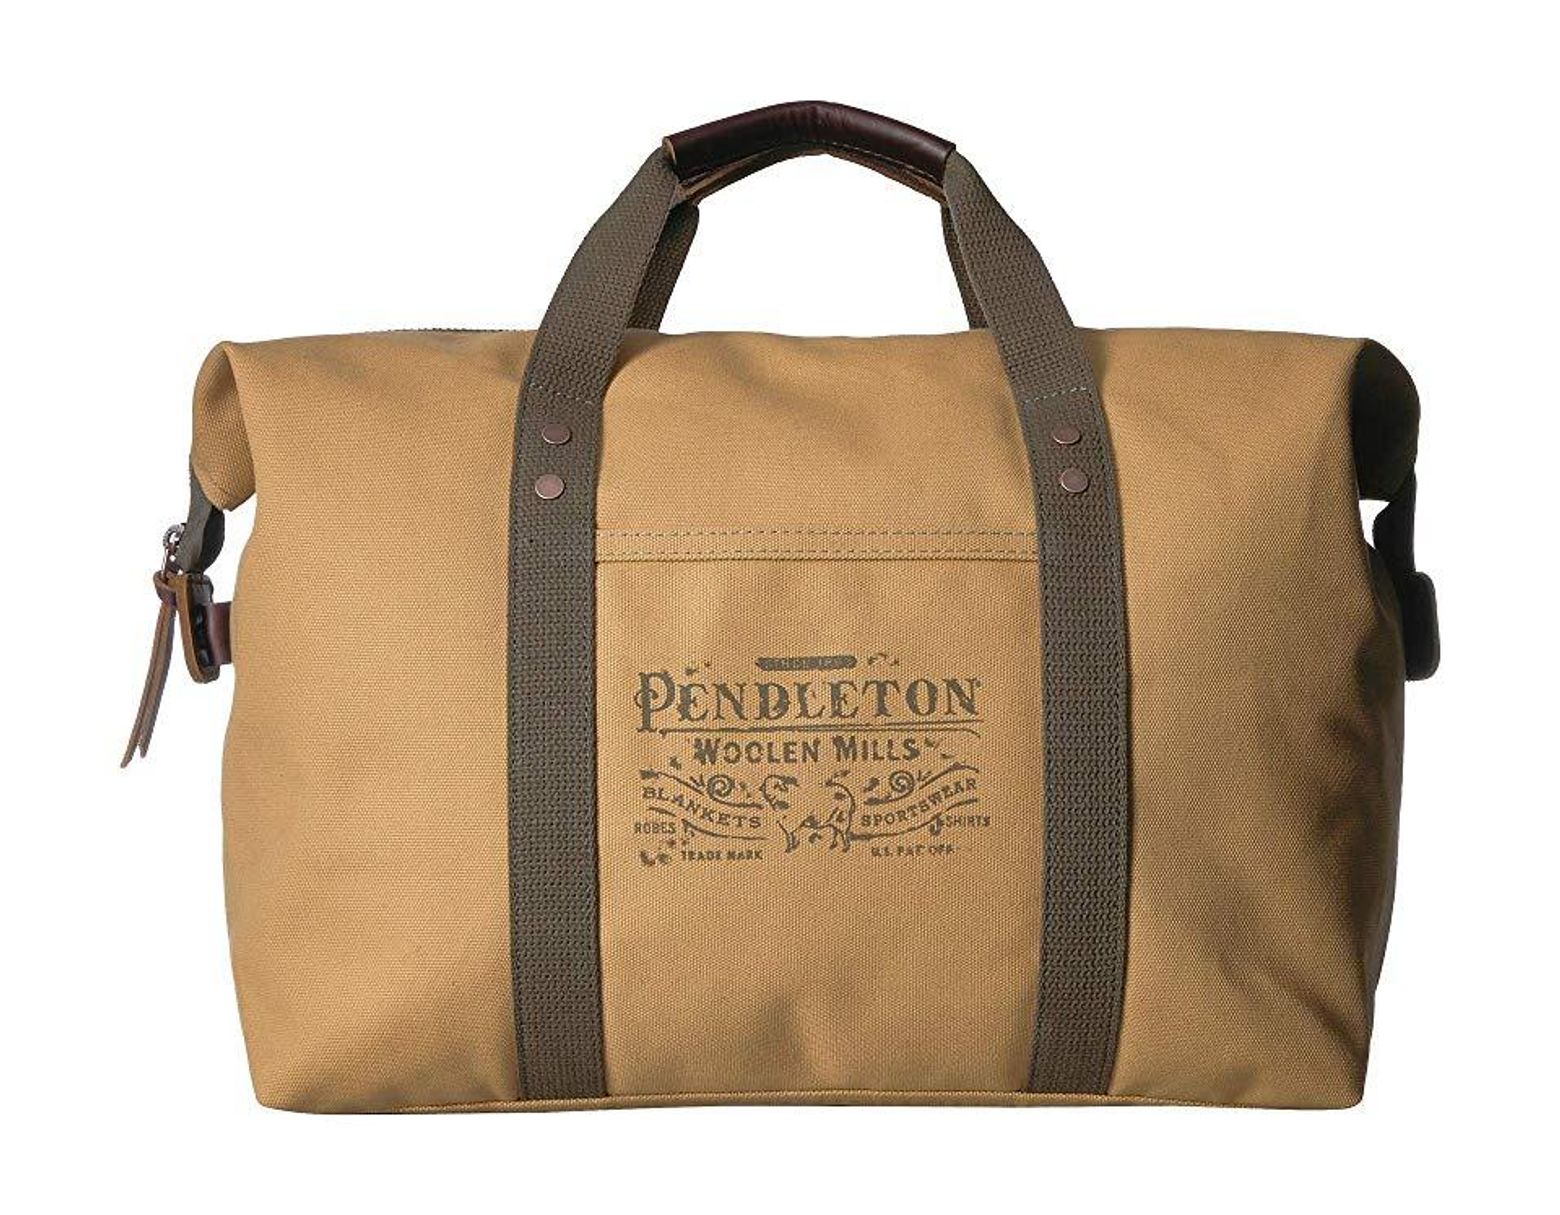 Pendleton Womens Canopy Canvas Tote